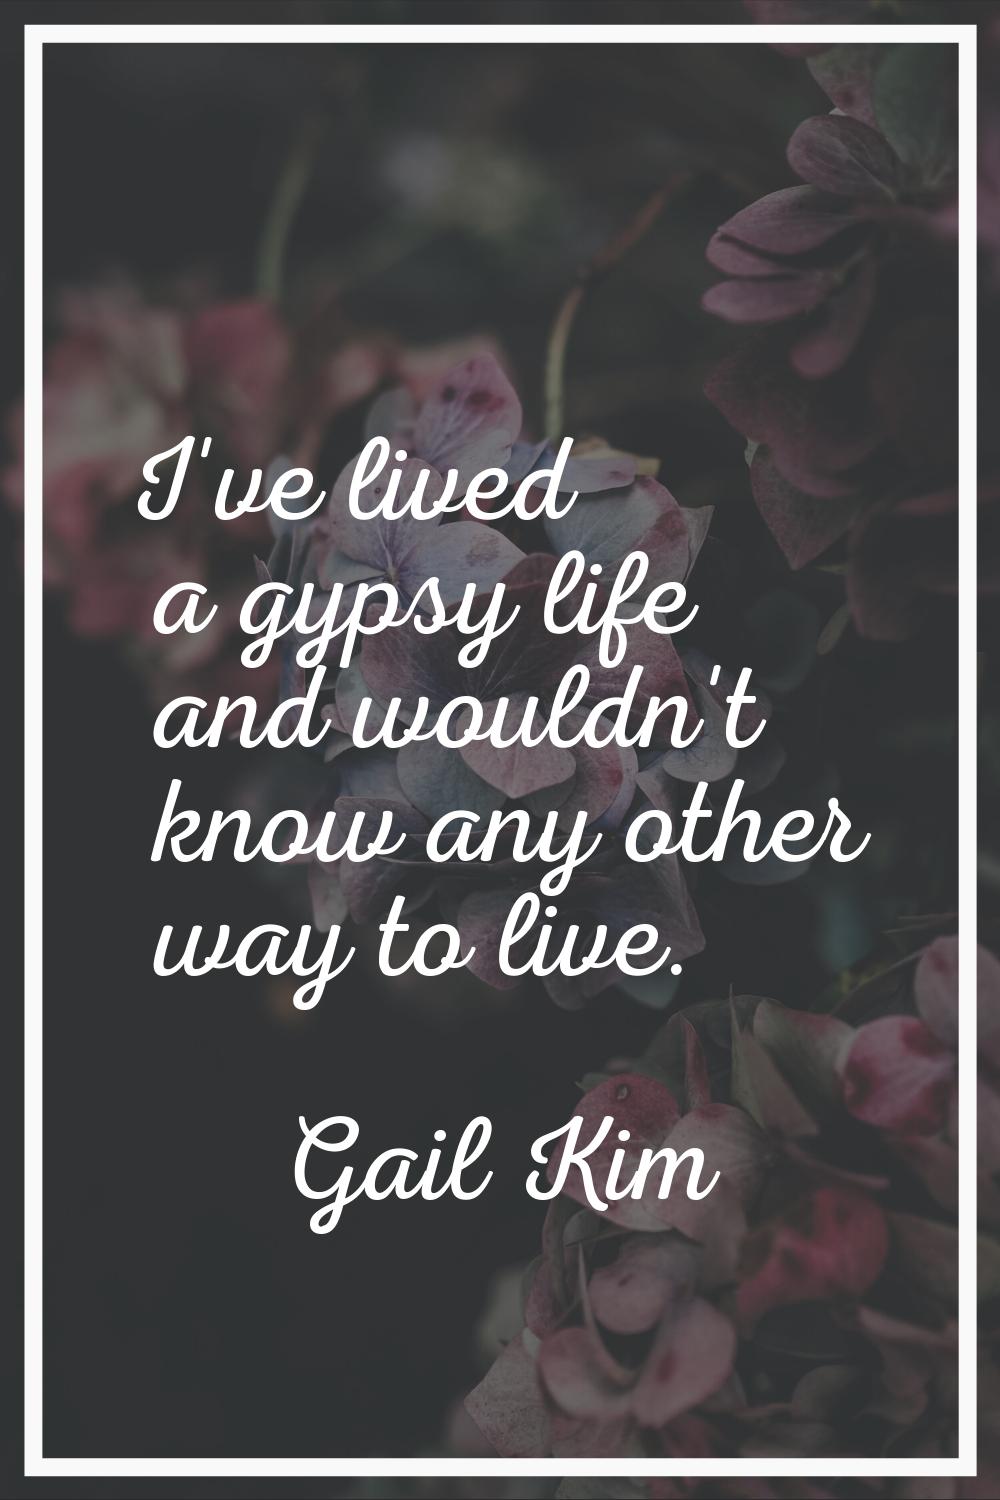 I've lived a gypsy life and wouldn't know any other way to live.